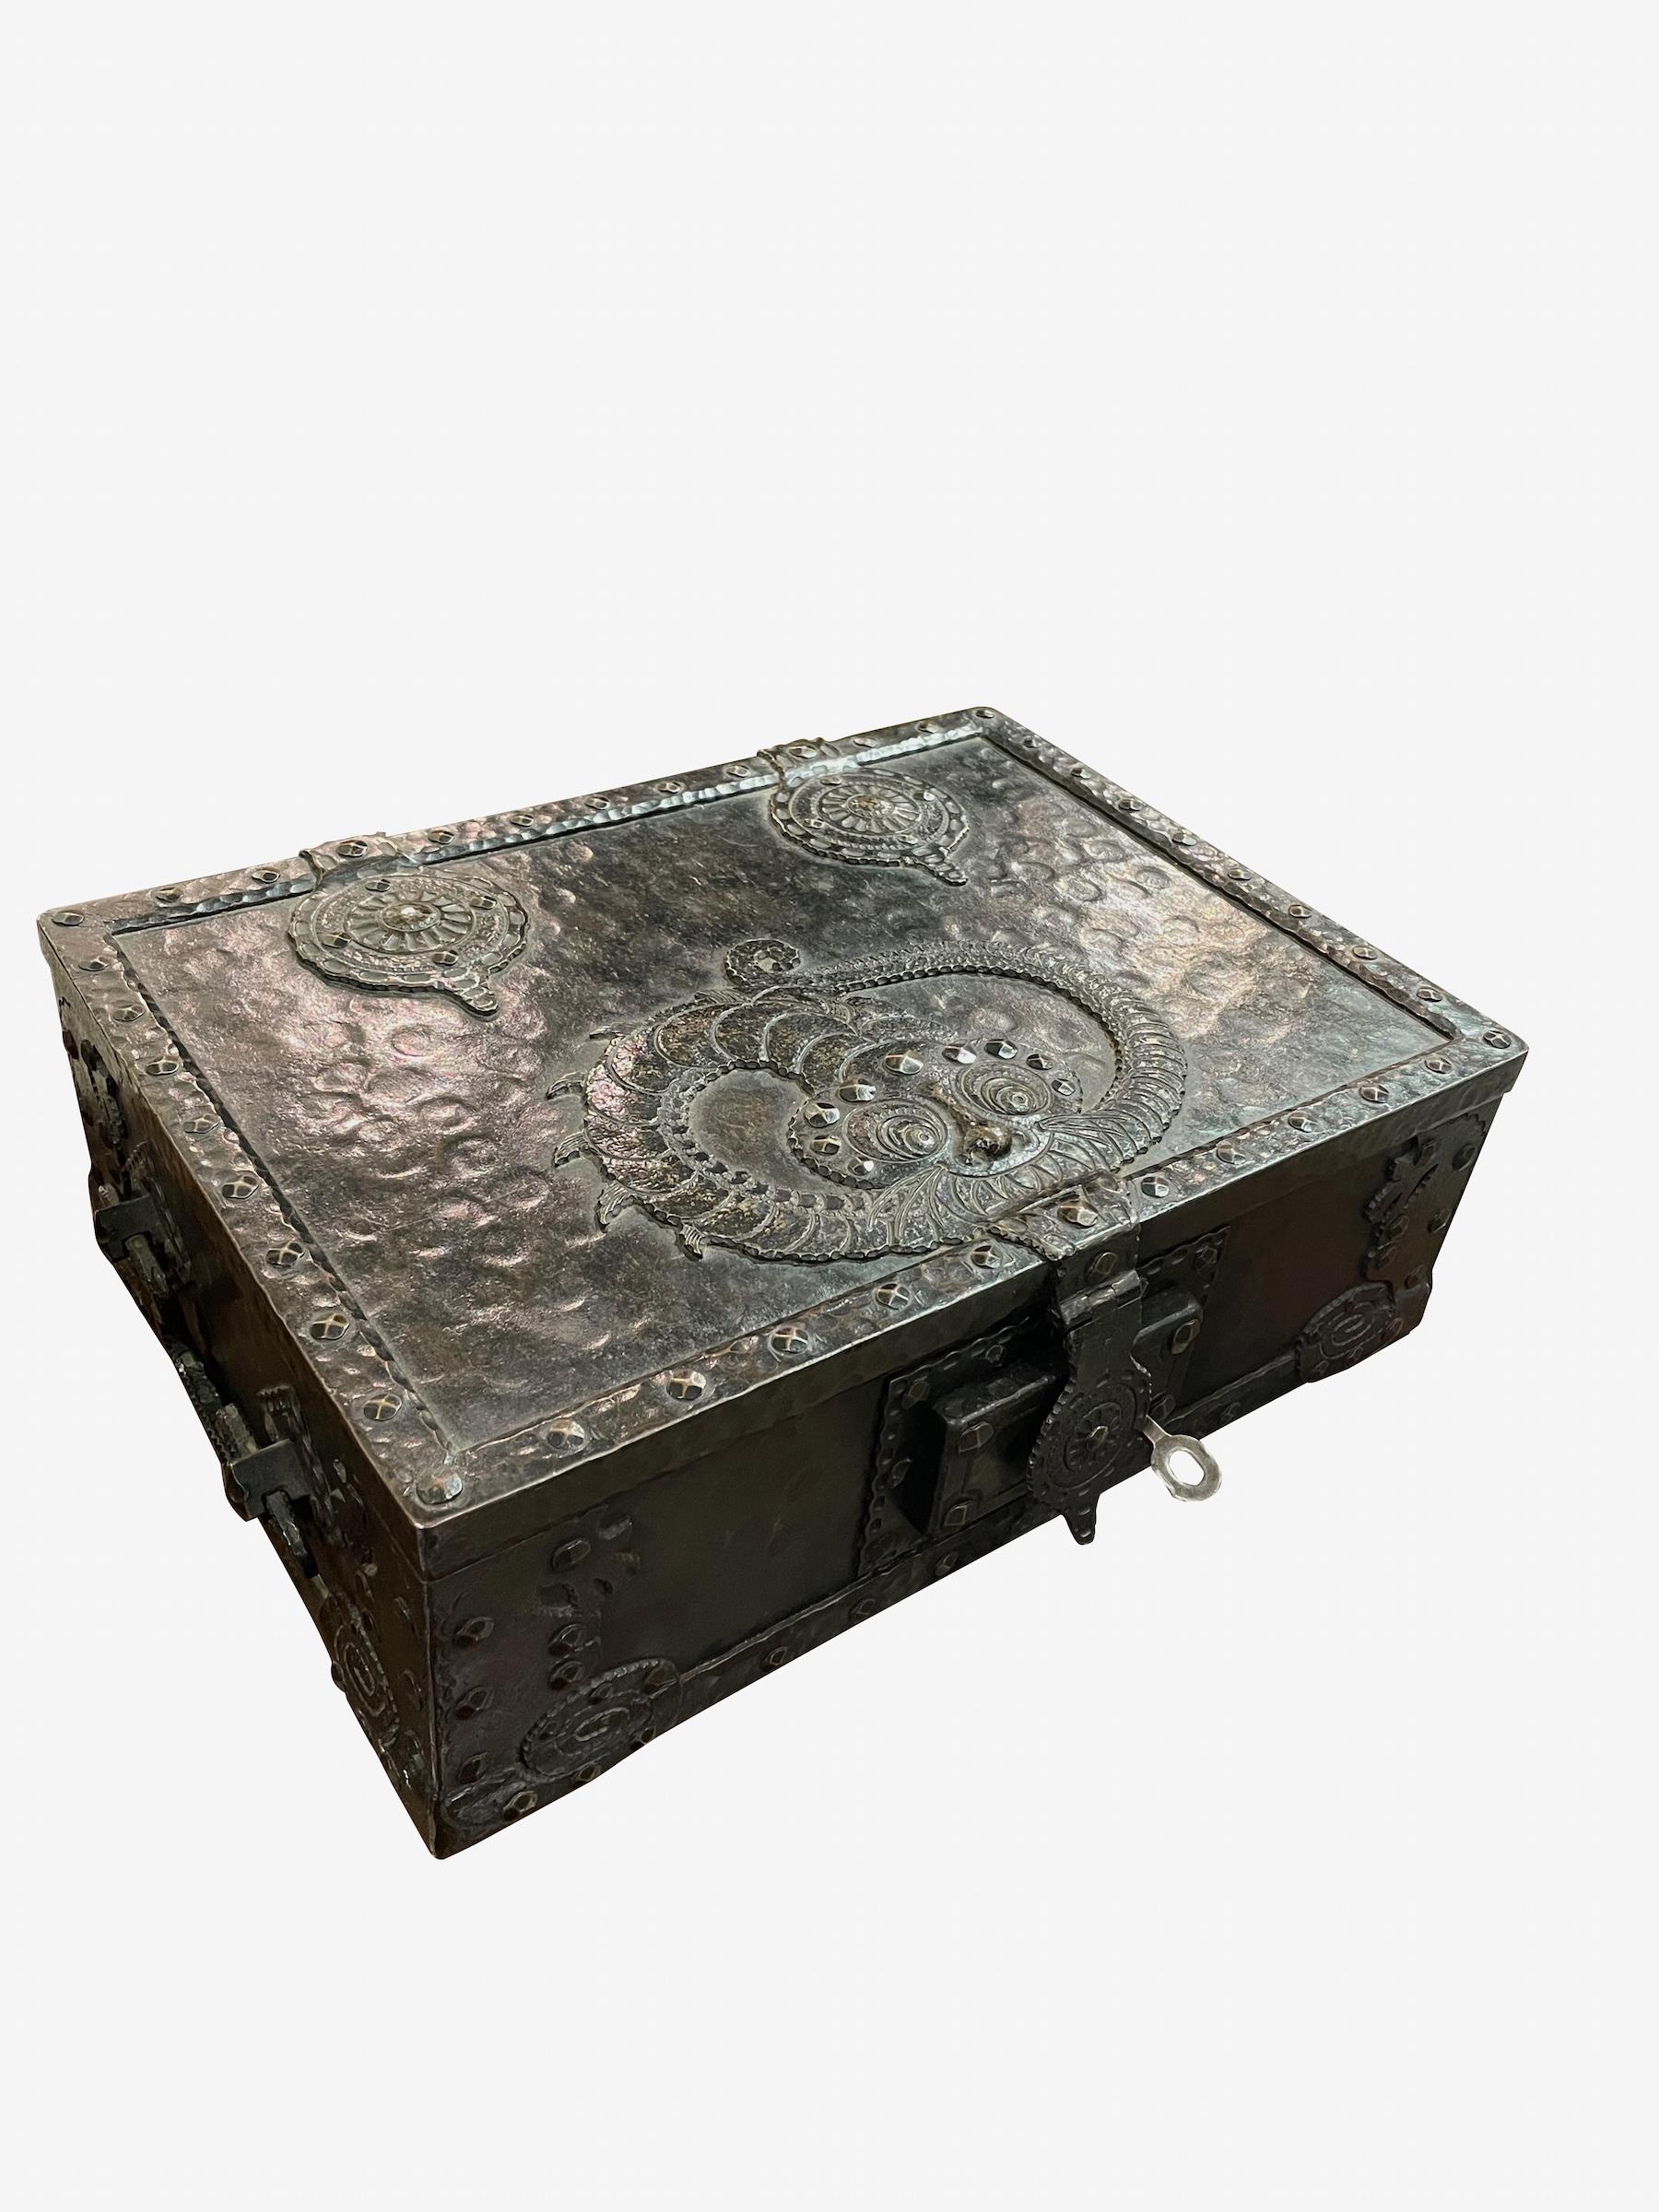 19th century Italian steel box with raised decorative motifs.
Original key.
Two handles.
Hammered border with rivets.
